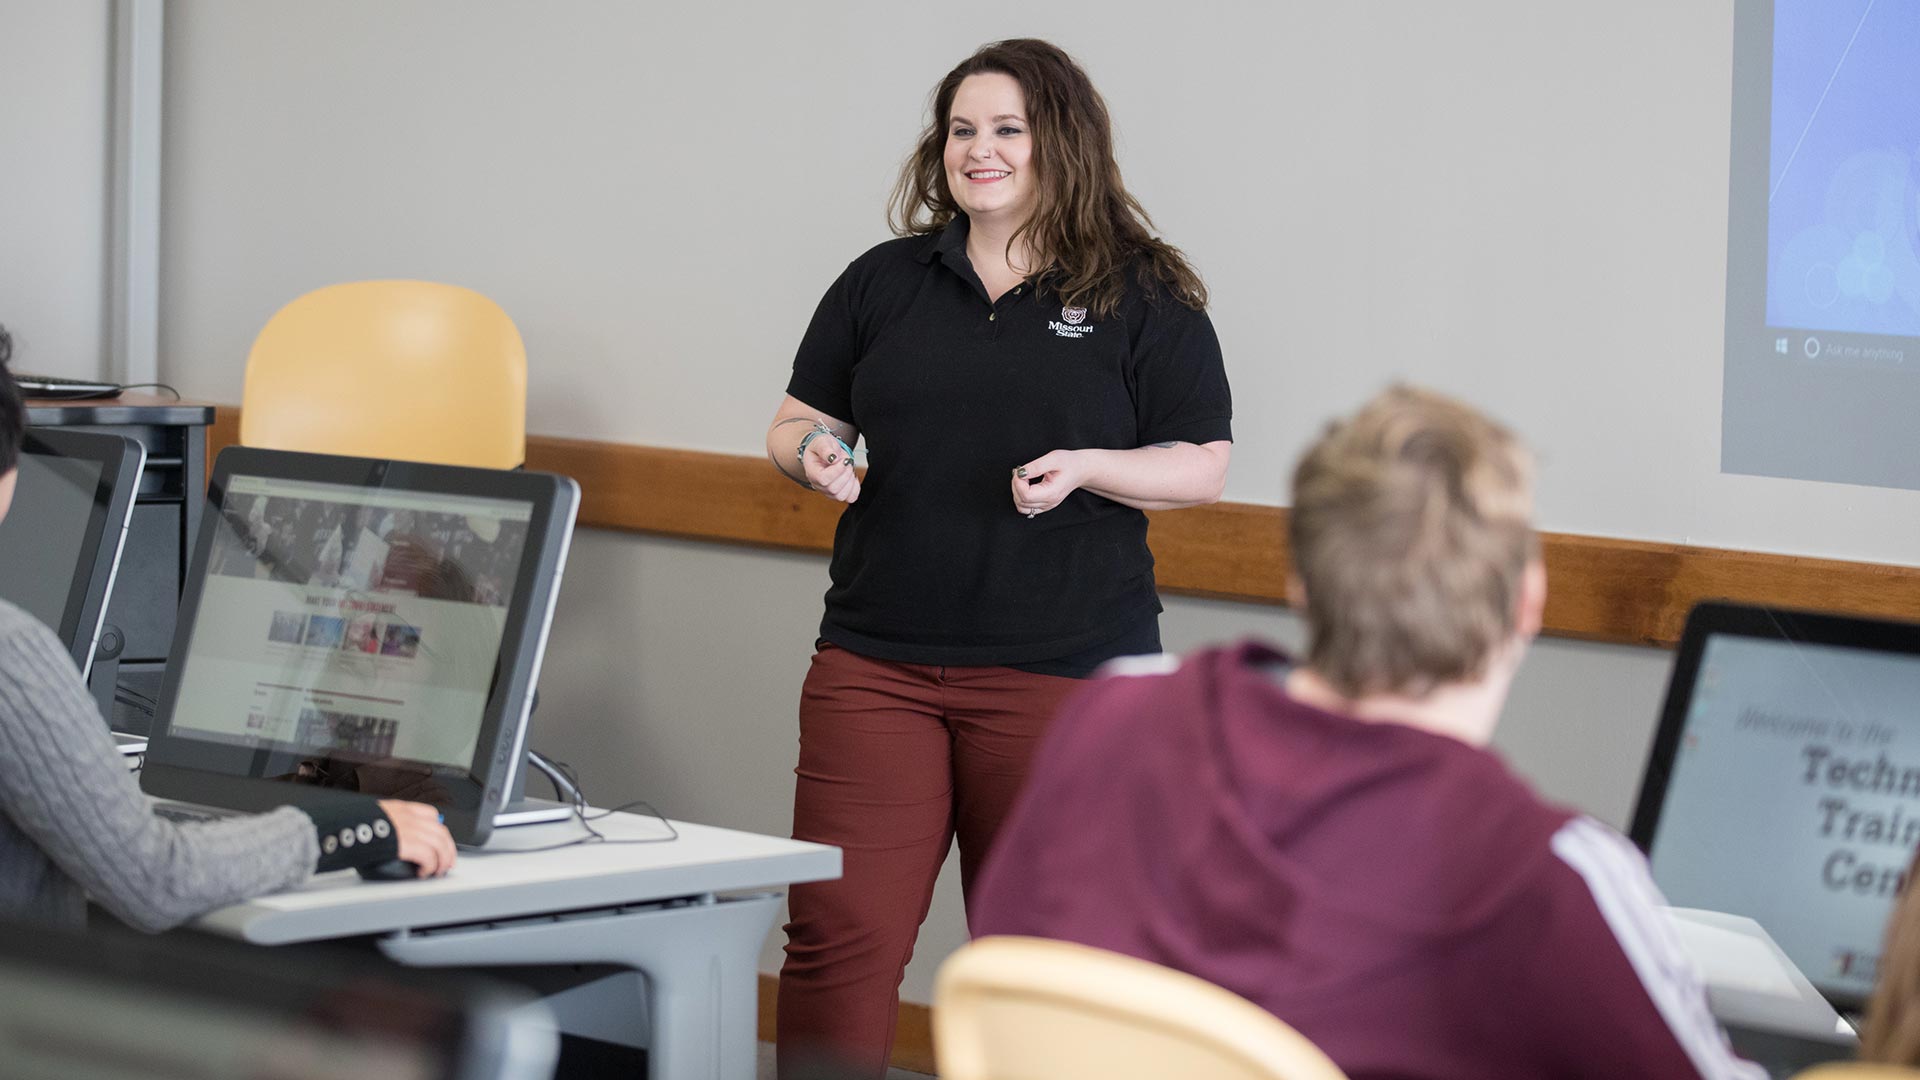 A computer services employee smiles as she conducts a training workshop in Cheek Hall.